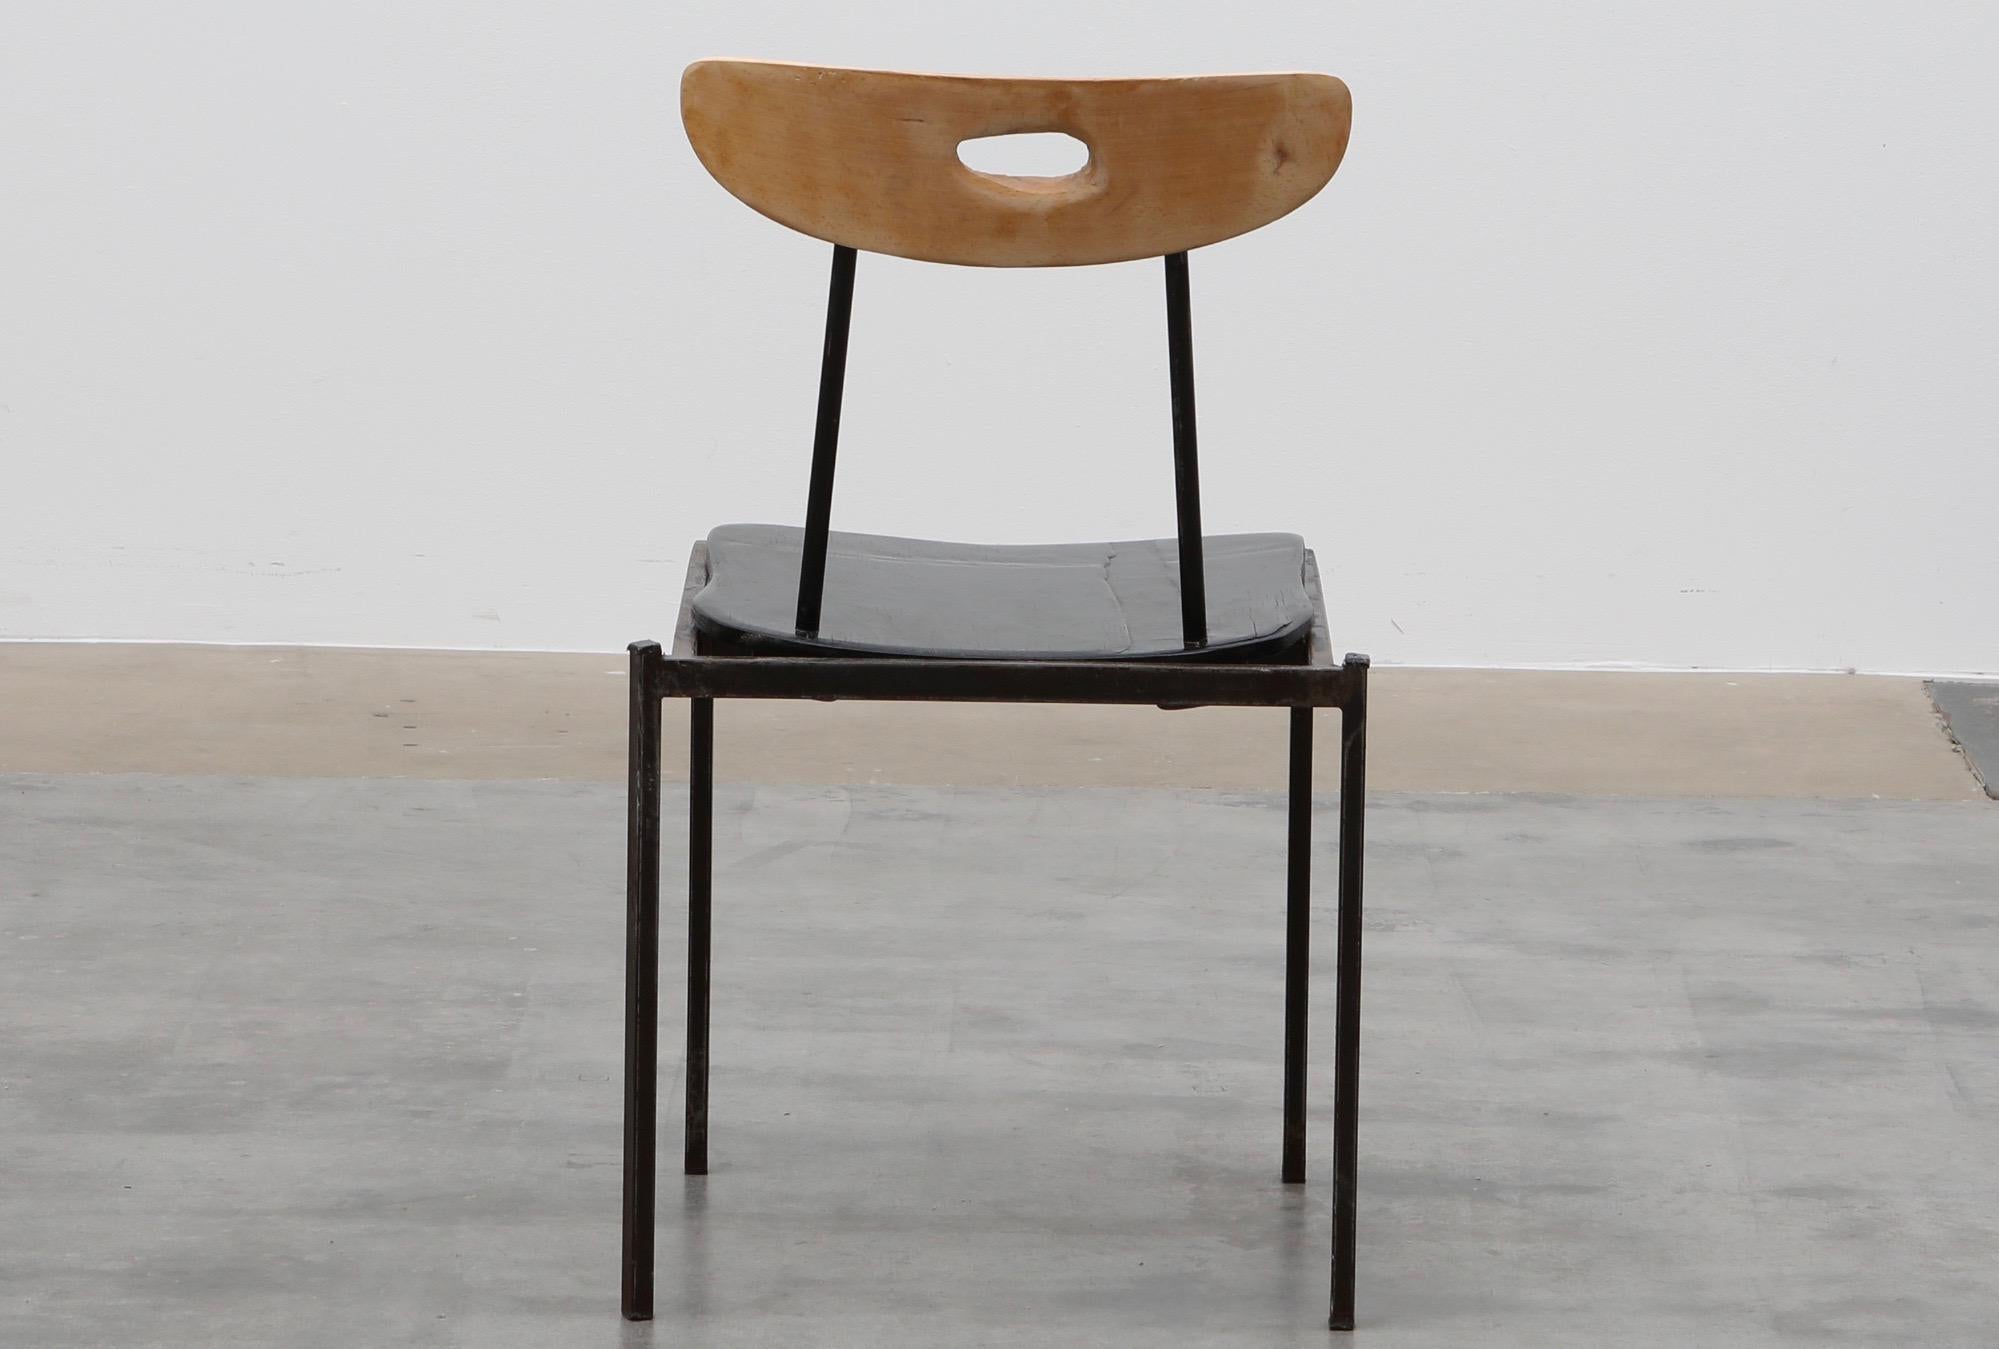 Steel Untitled Chair by Markus Friedrich Staab from the Black Is Beautiful Series